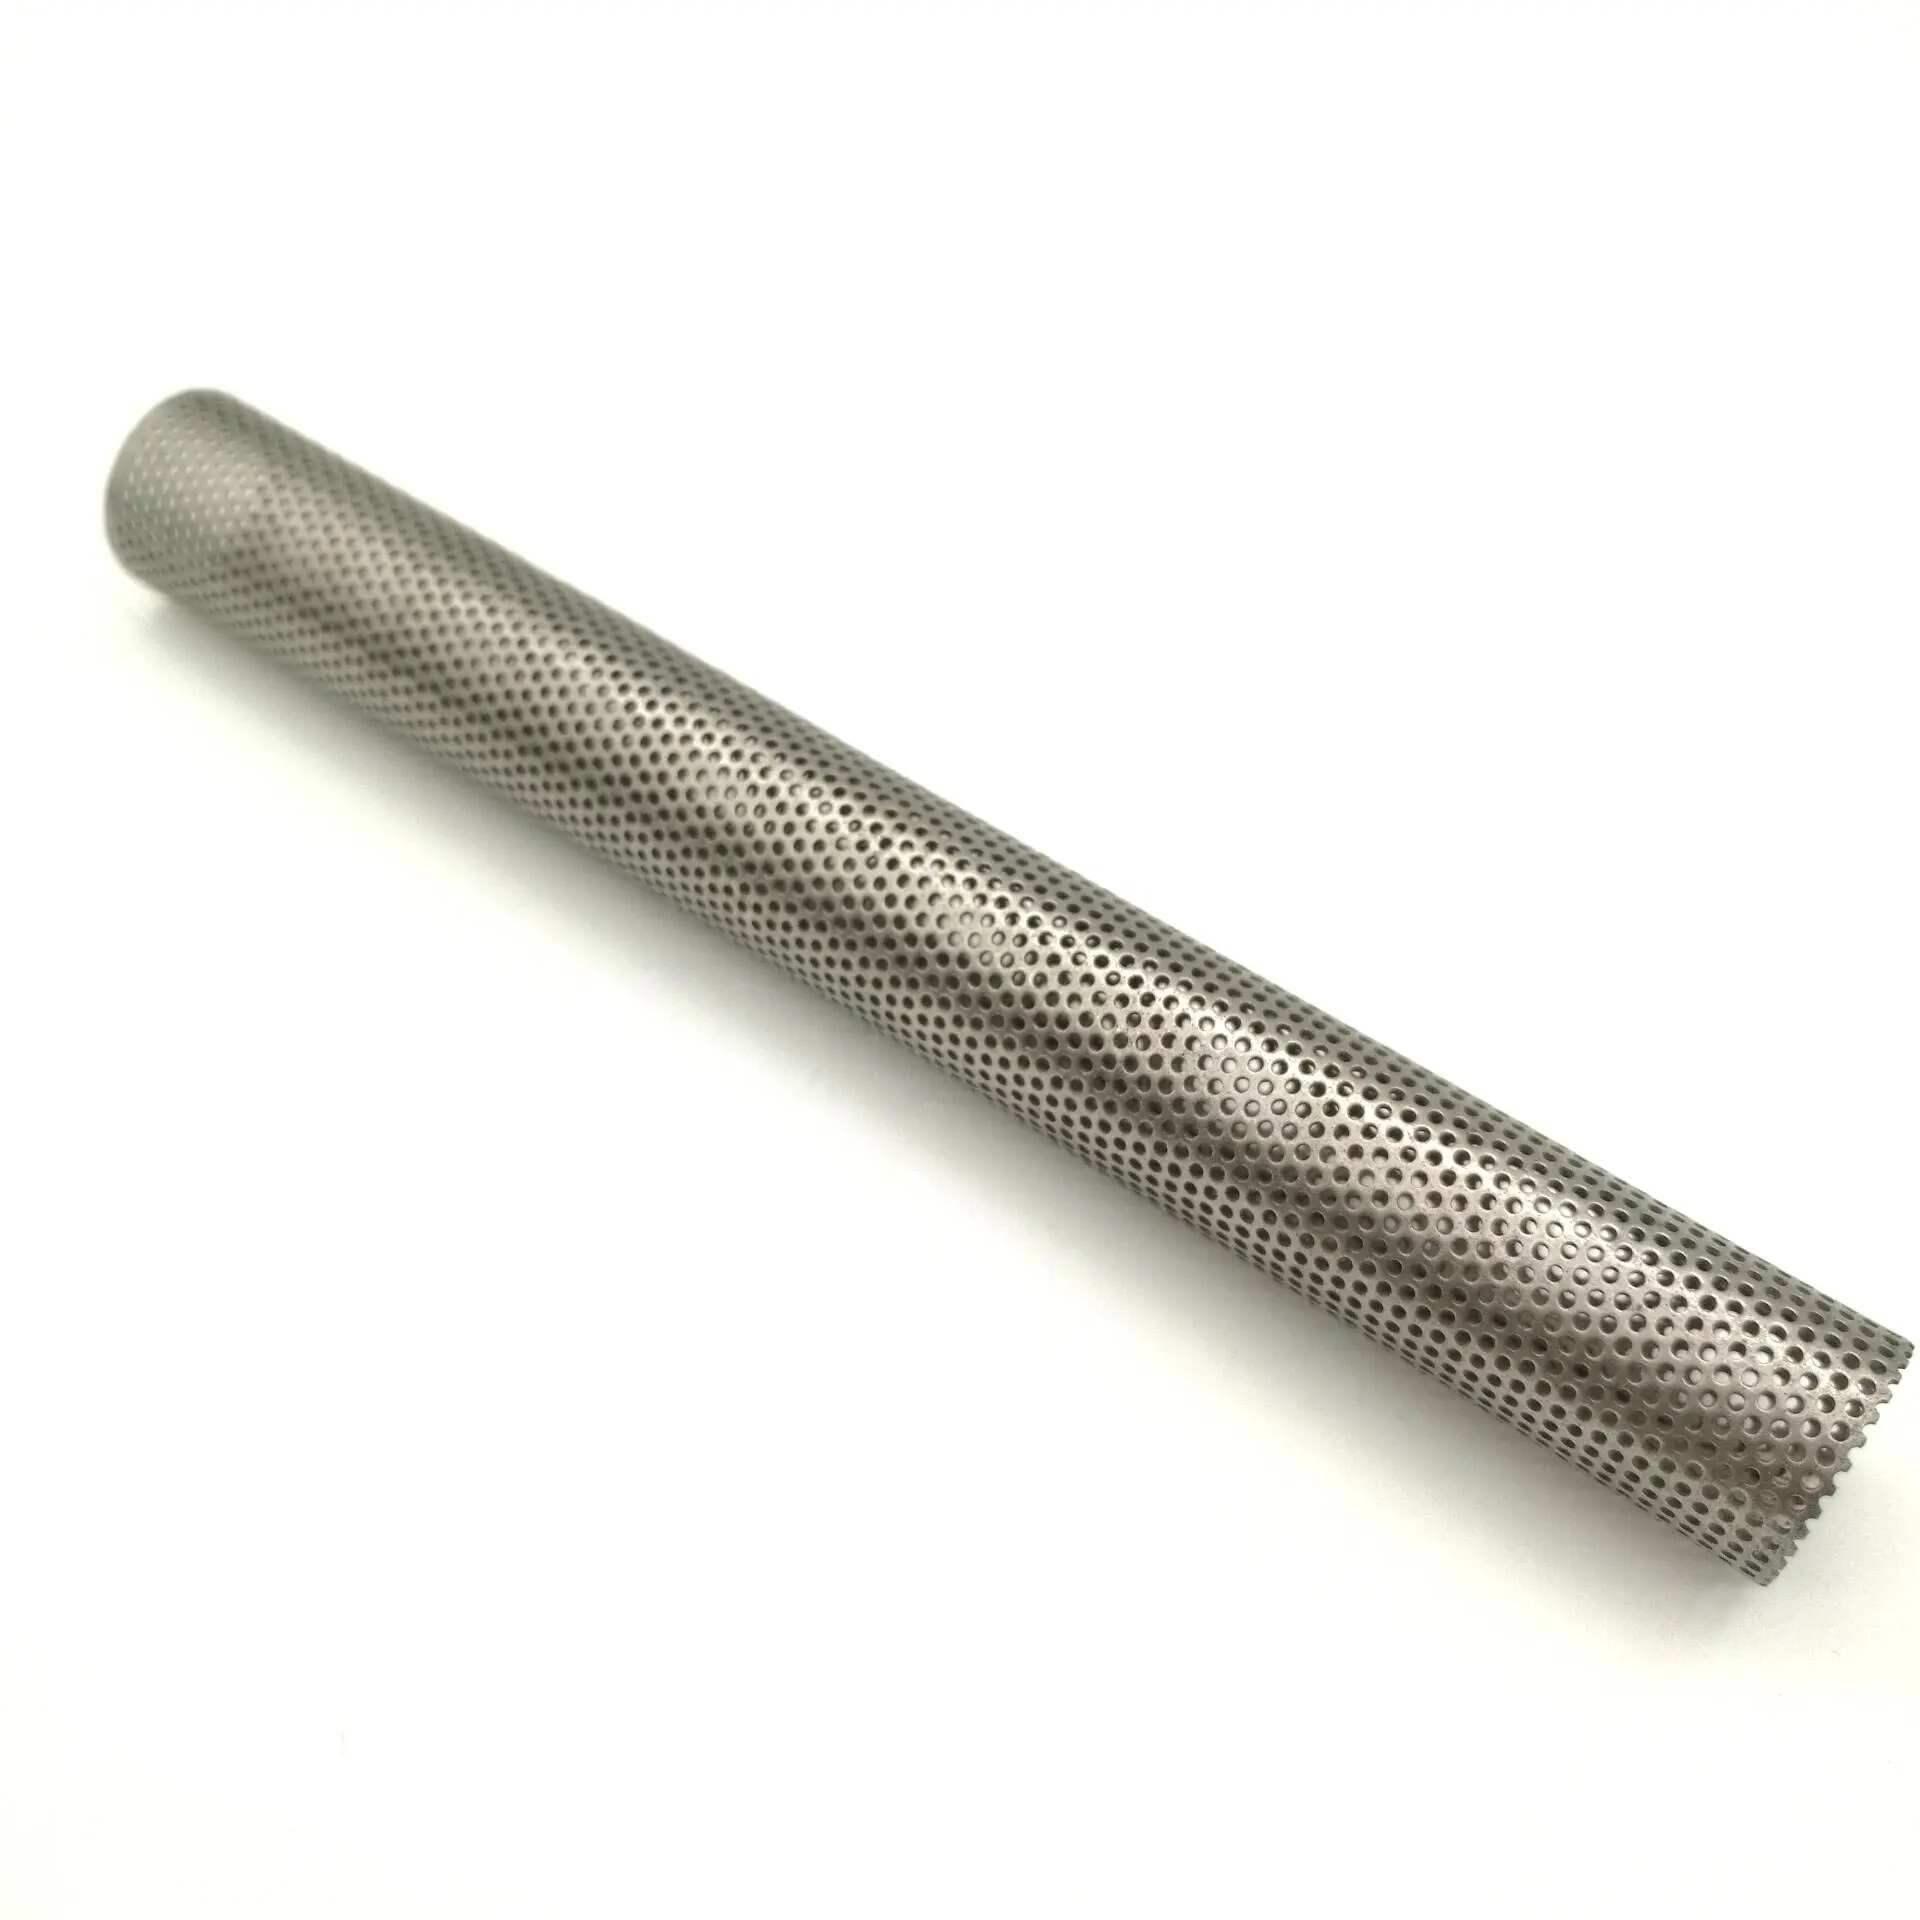 Stainless steel perforated metal mesh pipe water filter tube